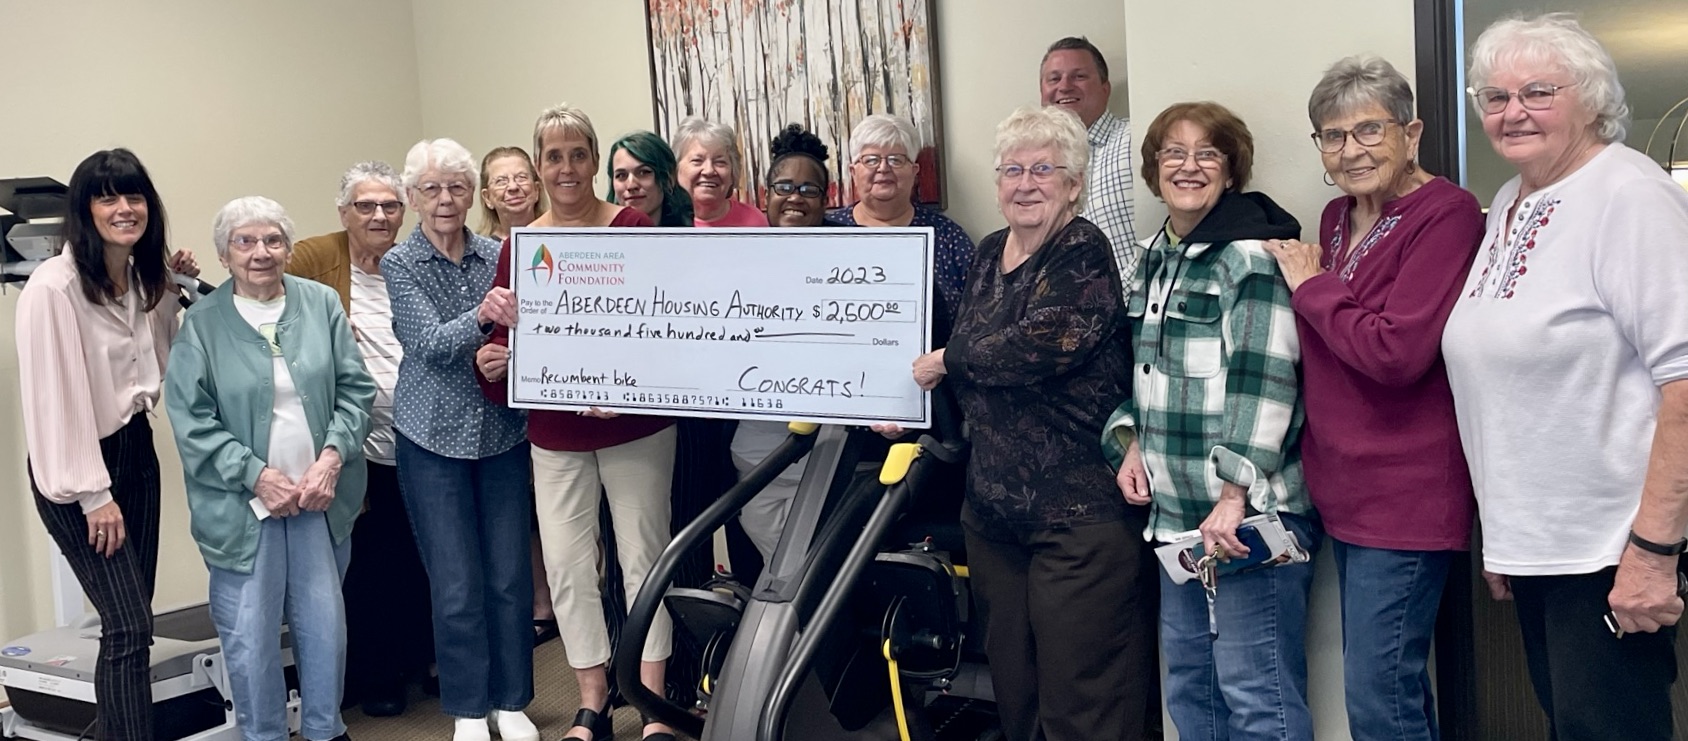 The Aberdeen Housing Authority was awarded $2,500 from the Aberdeen Area Community Foundation for a recumbent cross trainer for Central Villas Apartments. Pictured are Megan Biegler, at left, Aberdeen Area Community Foundation vice chairwoman; and Heath Johnson, in back on the bike, Aberdeen Area Community Foundation chairman; with staff and residents of the Aberdeen Housing Authority’s Central Villas. Courtesy photo